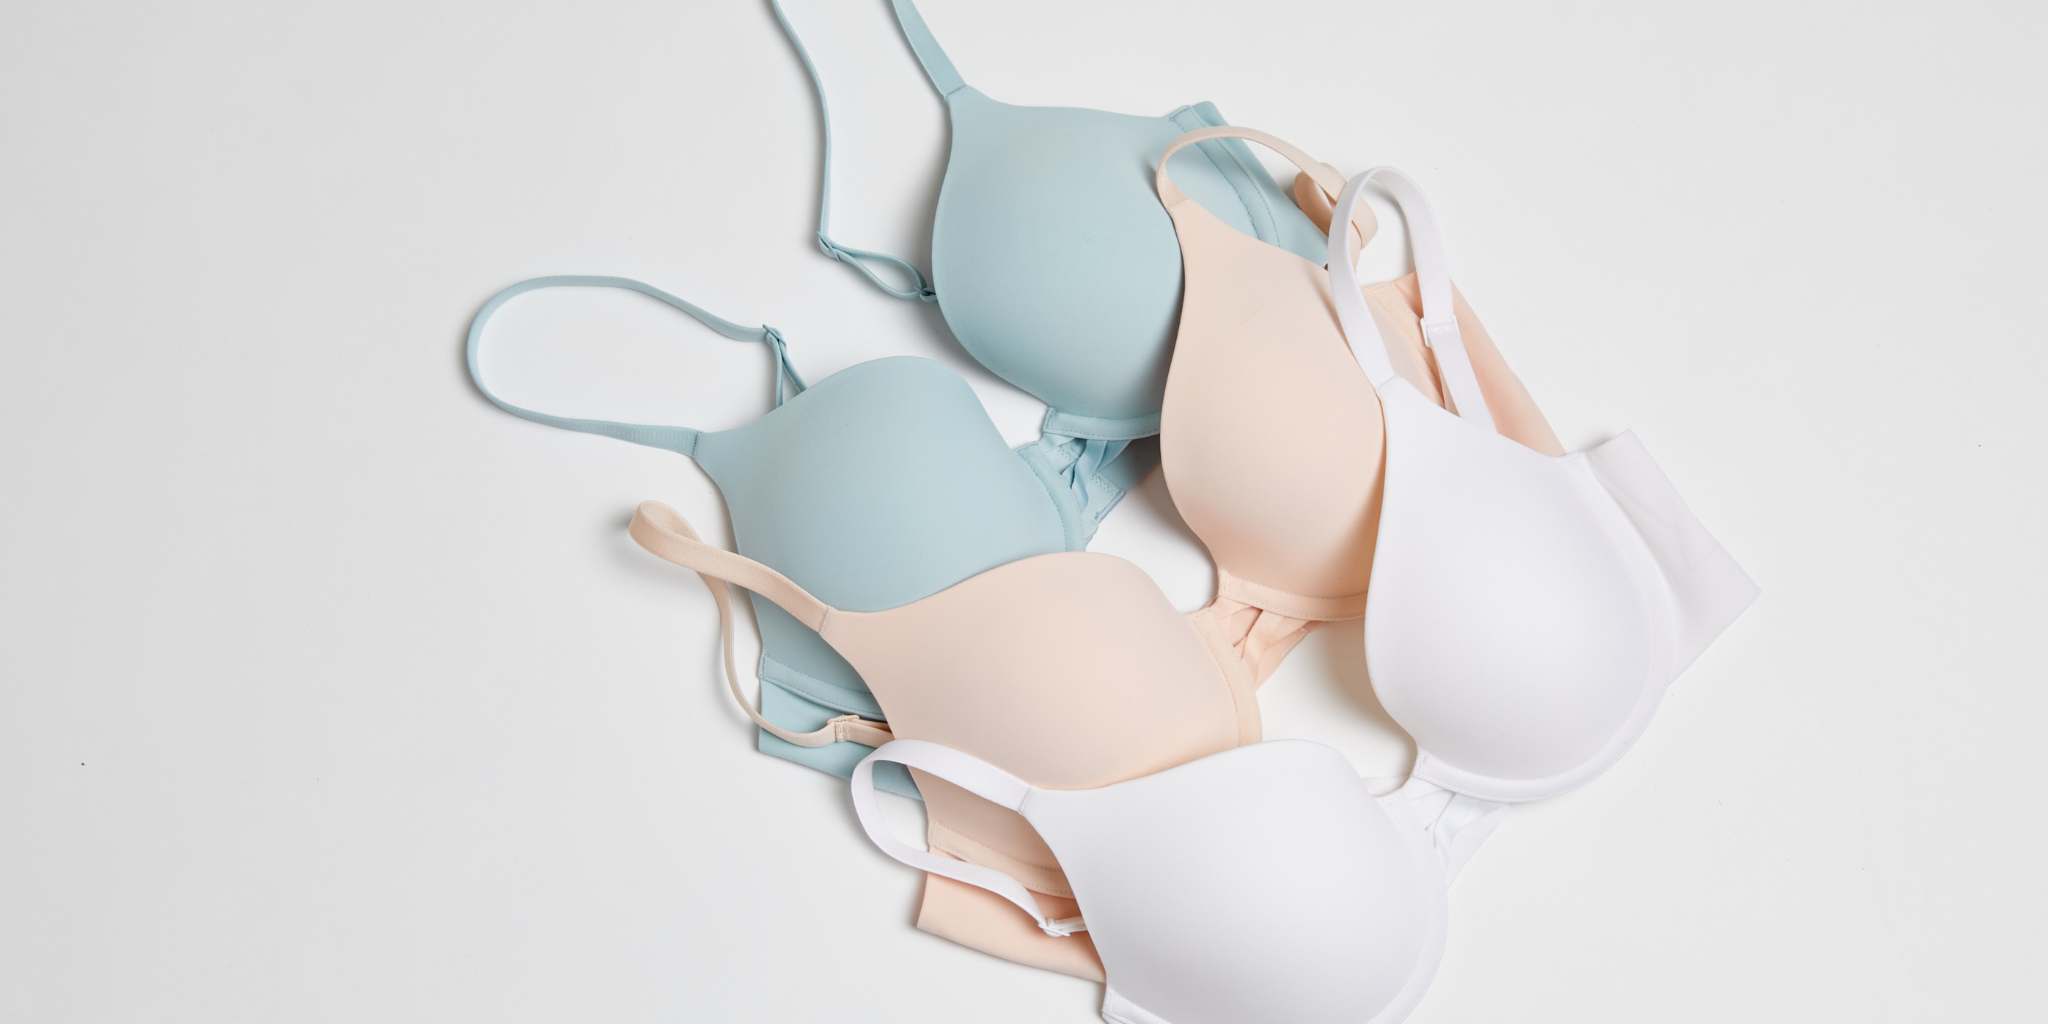 Learn About What the Smallest Bra Size Is